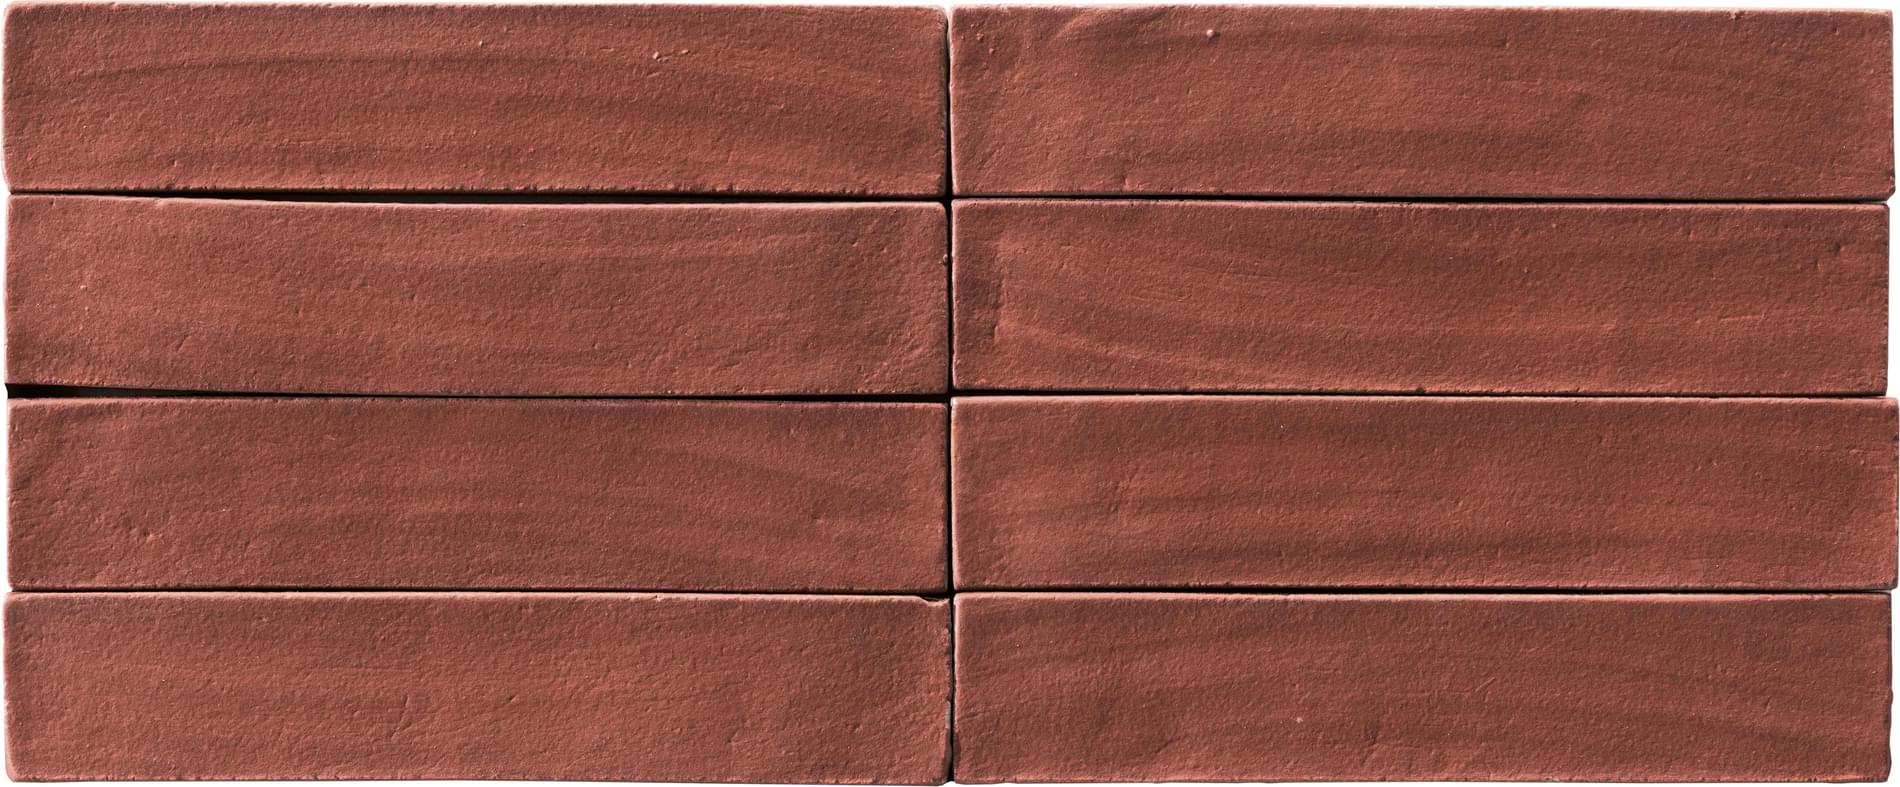 Sartoria Split And Fornace Fornace Red Brick 6x30